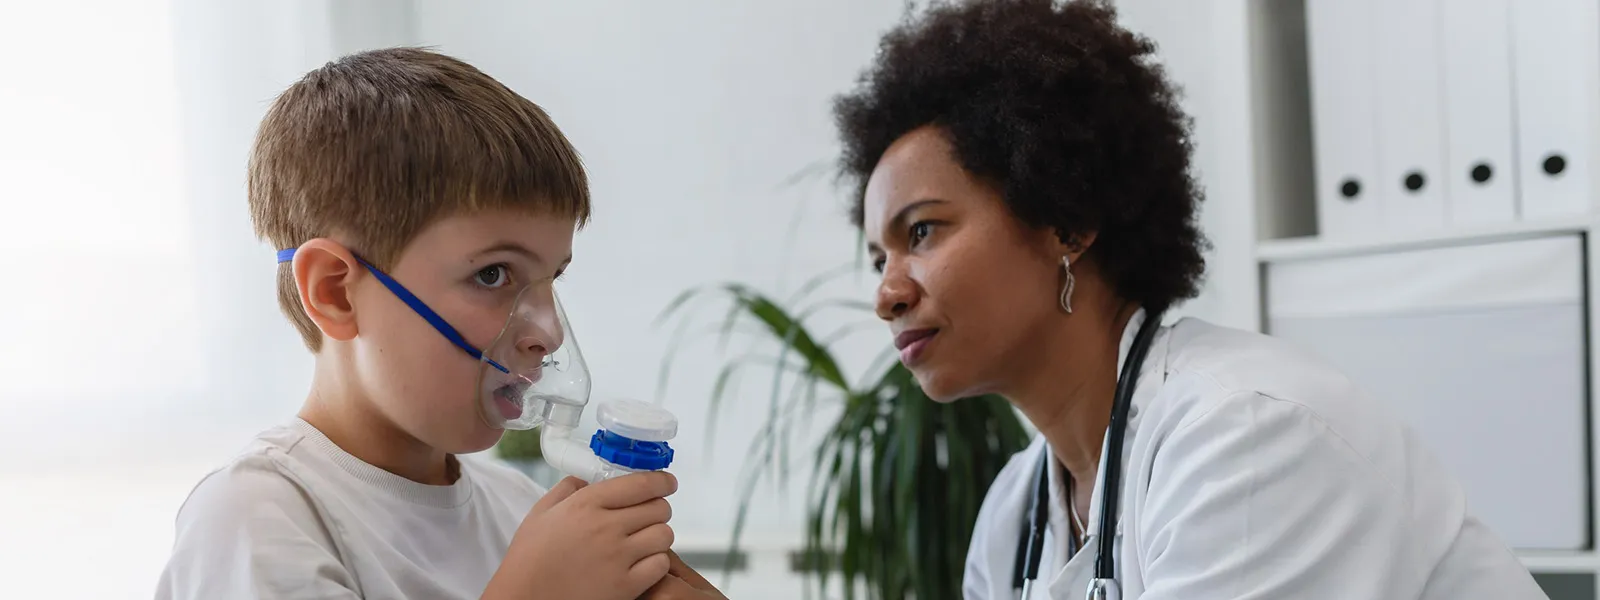 A nurse administering inhalation treatment to a young child.